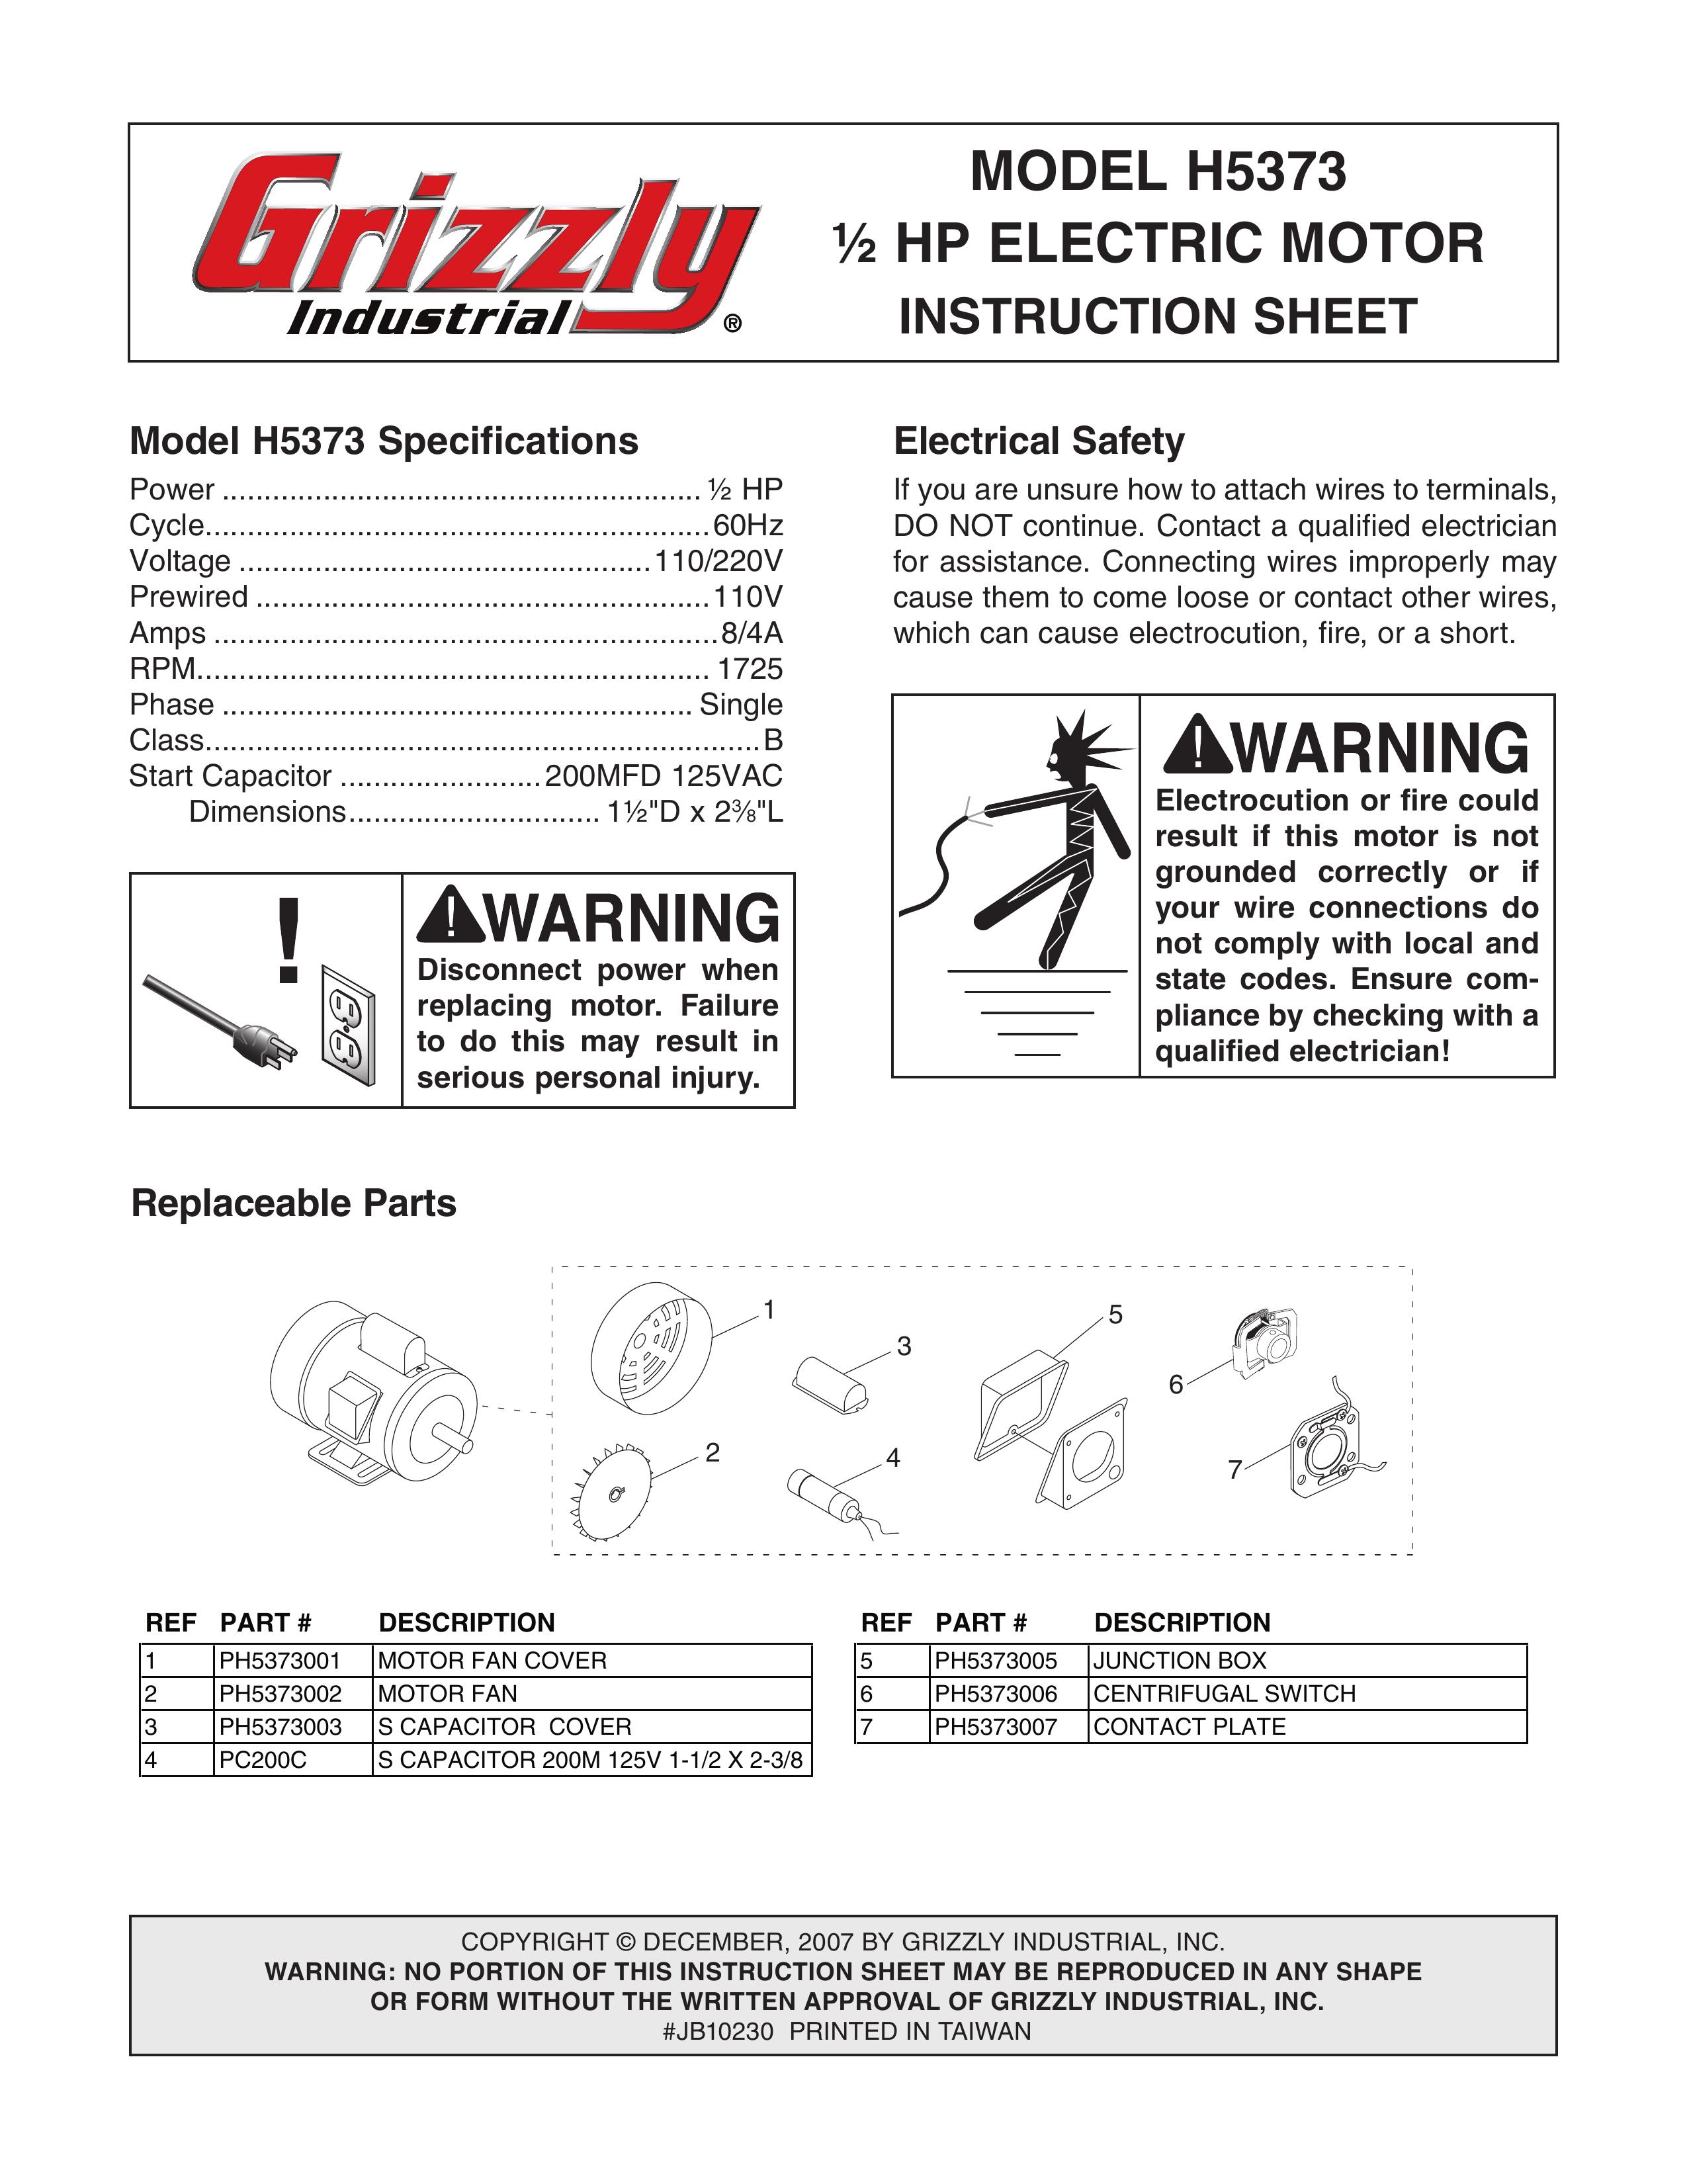 Grizzly H5373 Outboard Motor User Manual